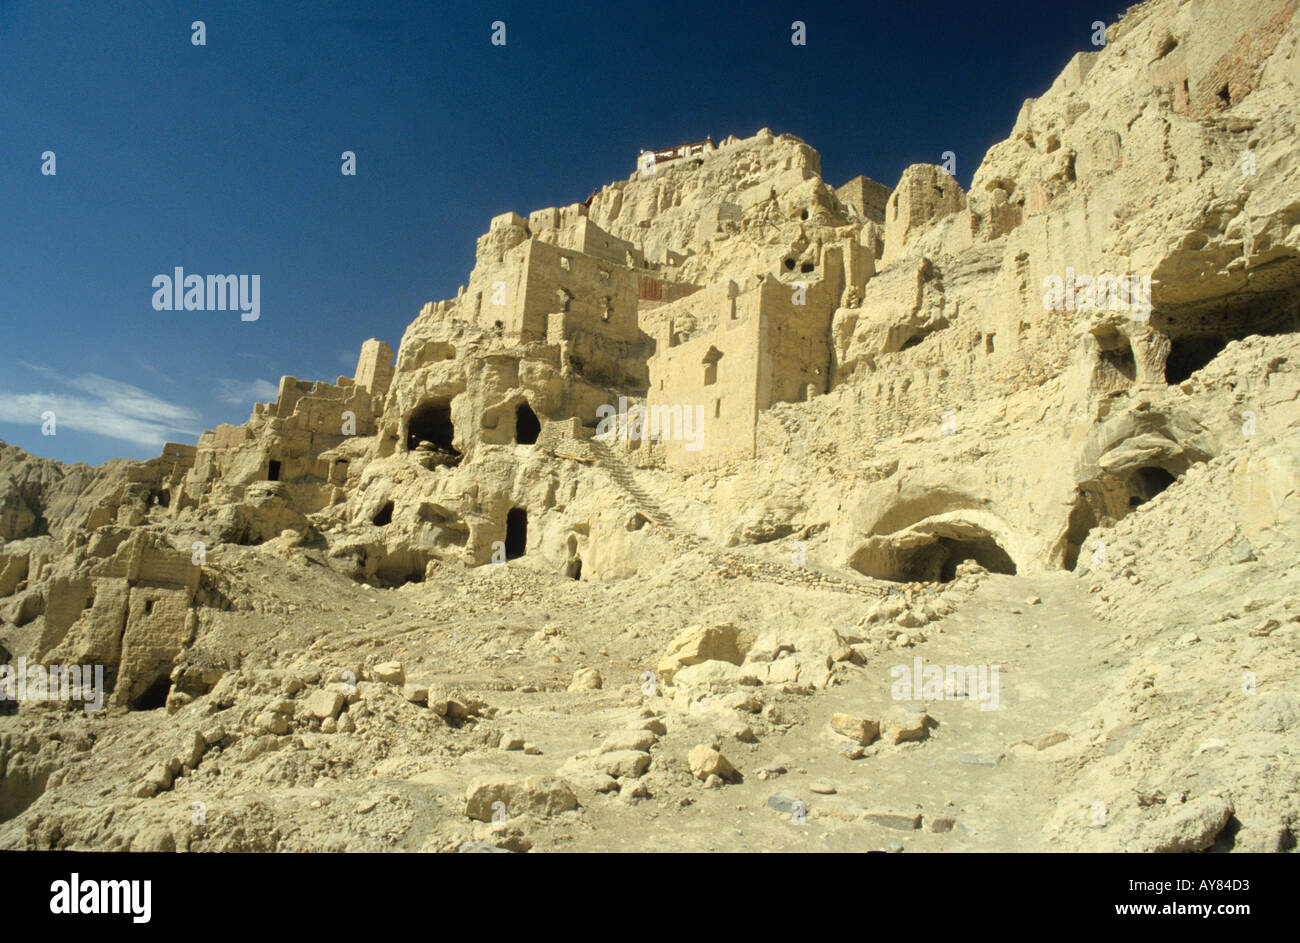 Ancient  Archaeological Remains of Tsaparang of the great 10th century City of Guge ,GU GE, in the west of Tibet Stock Photo